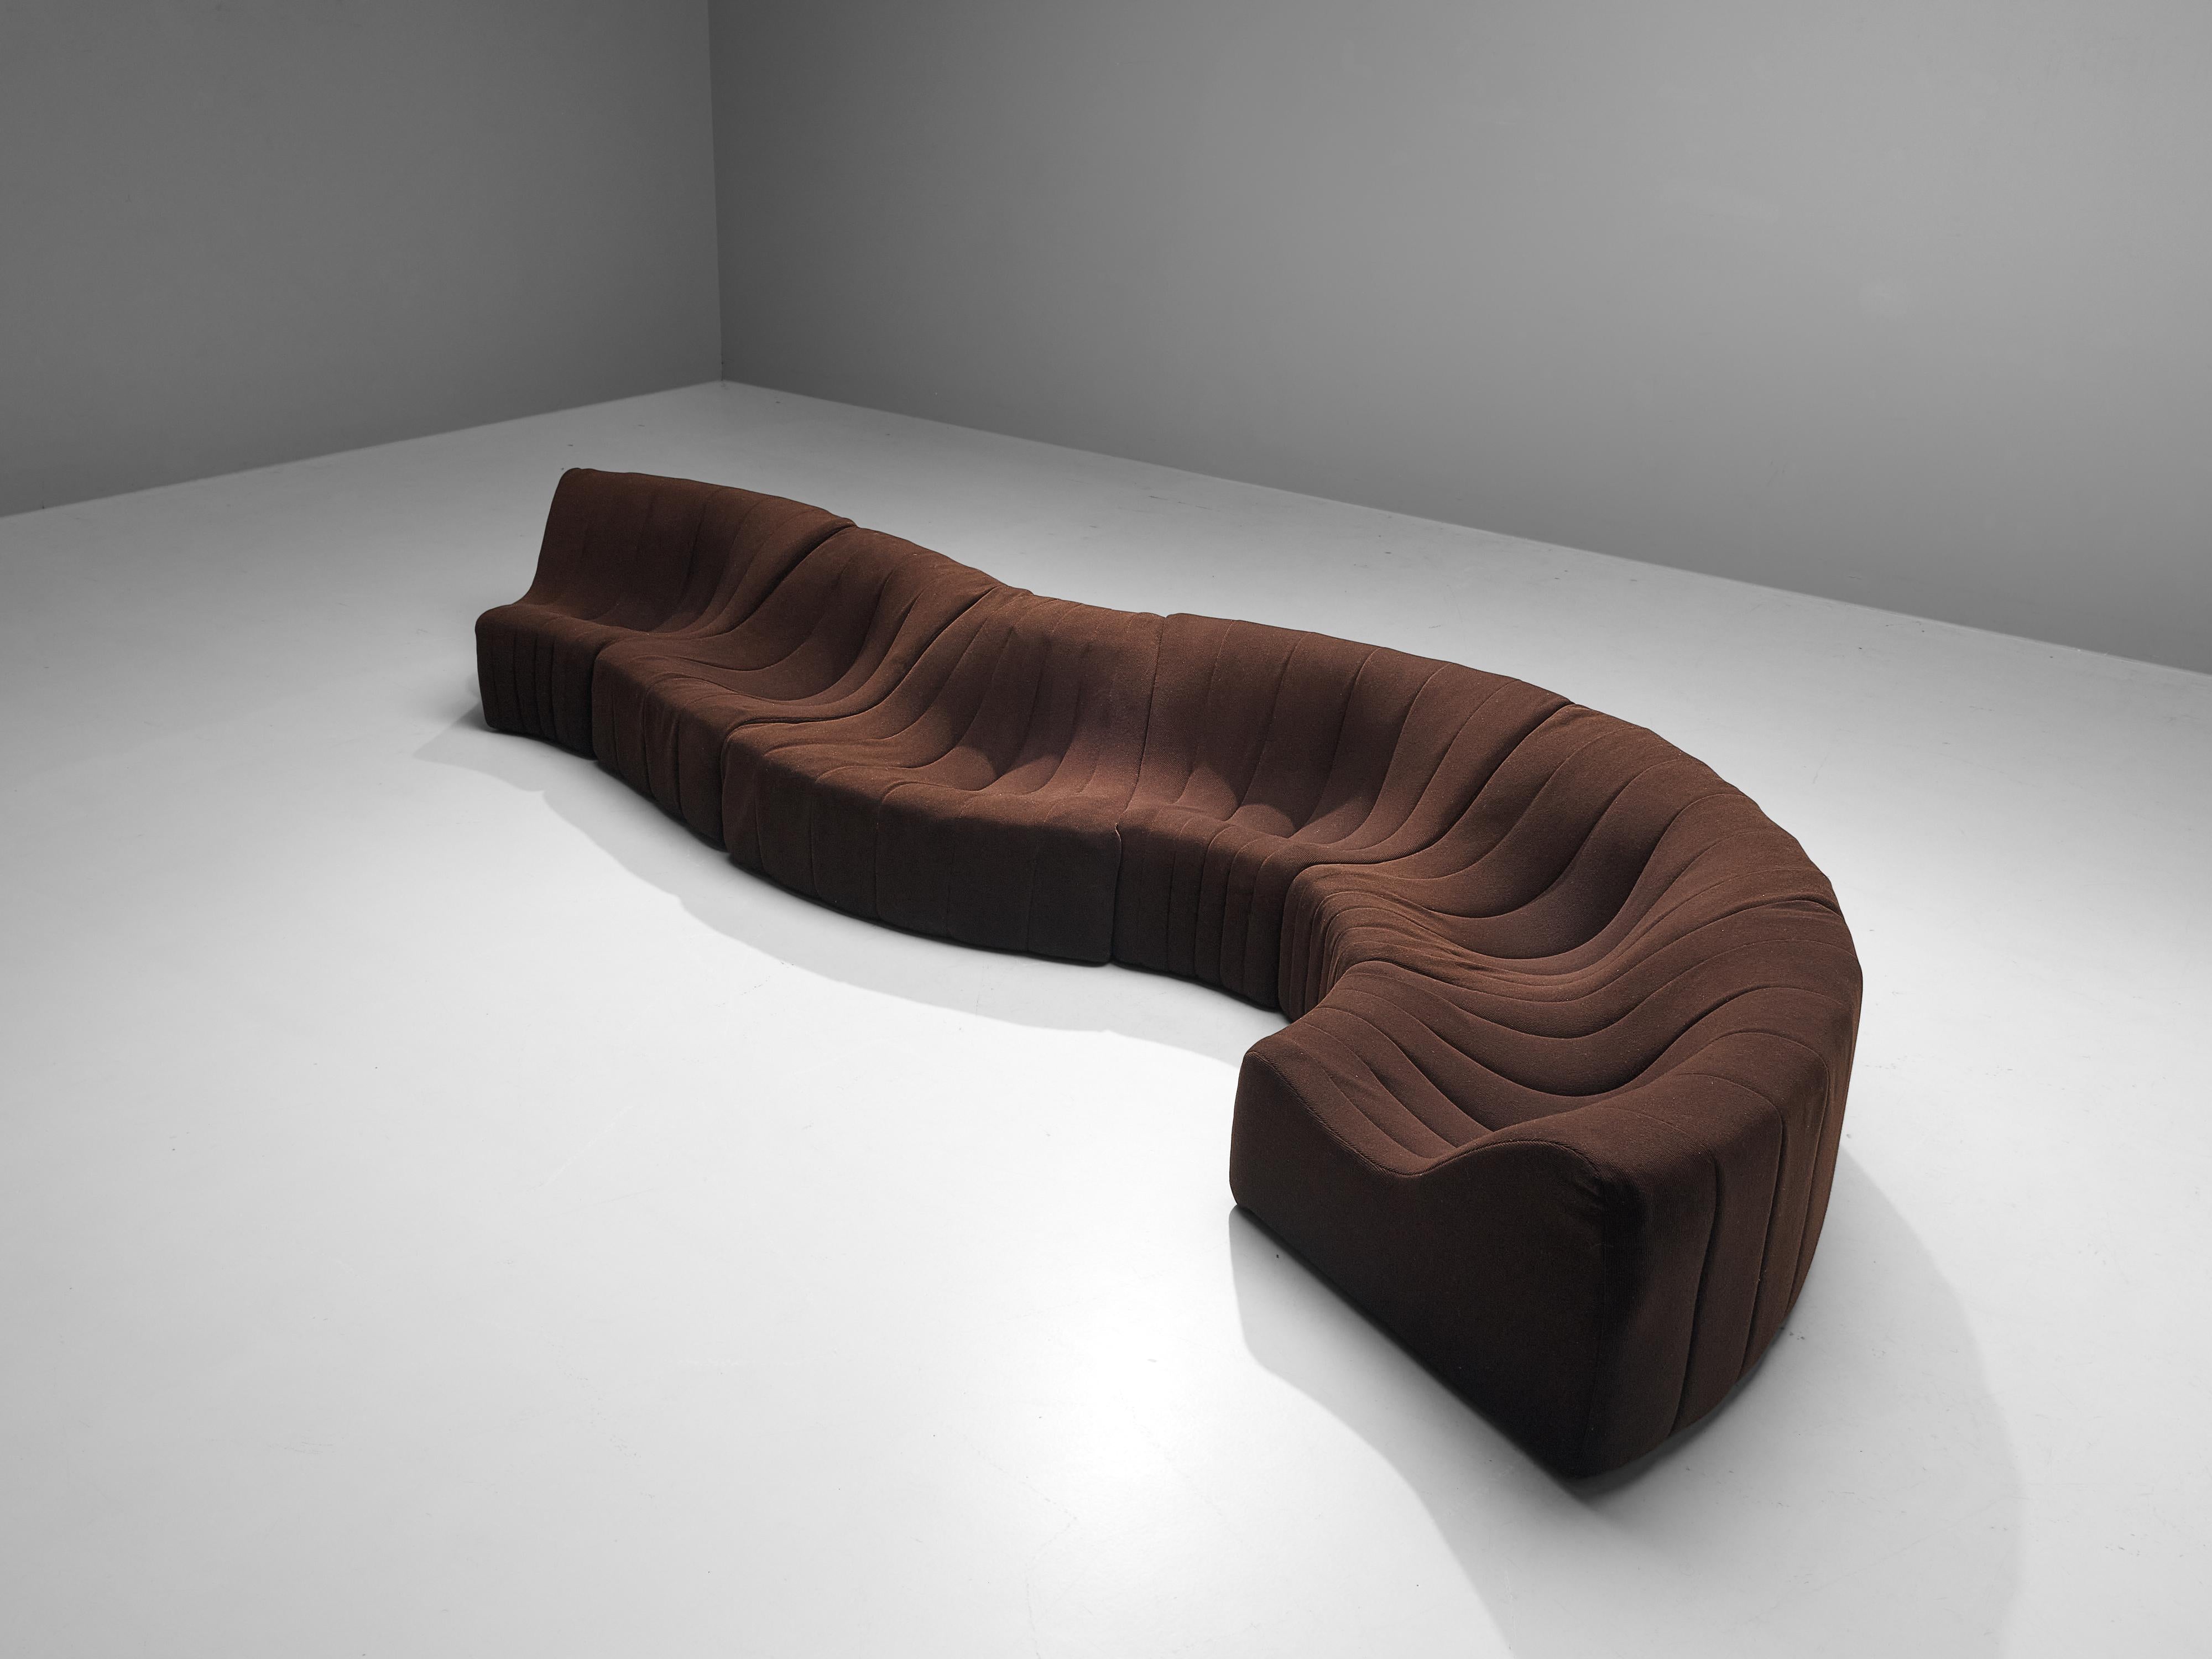 Kwok Hoi Chan for Steiner, modular sofa, model ´chromatic´, brown upholstery, France, circa 1970. 

Organic modular sofa designed by the Hong Kongese designer Kwok Hoi Chan. This grand piece of furniture contains six elements which can be arranged